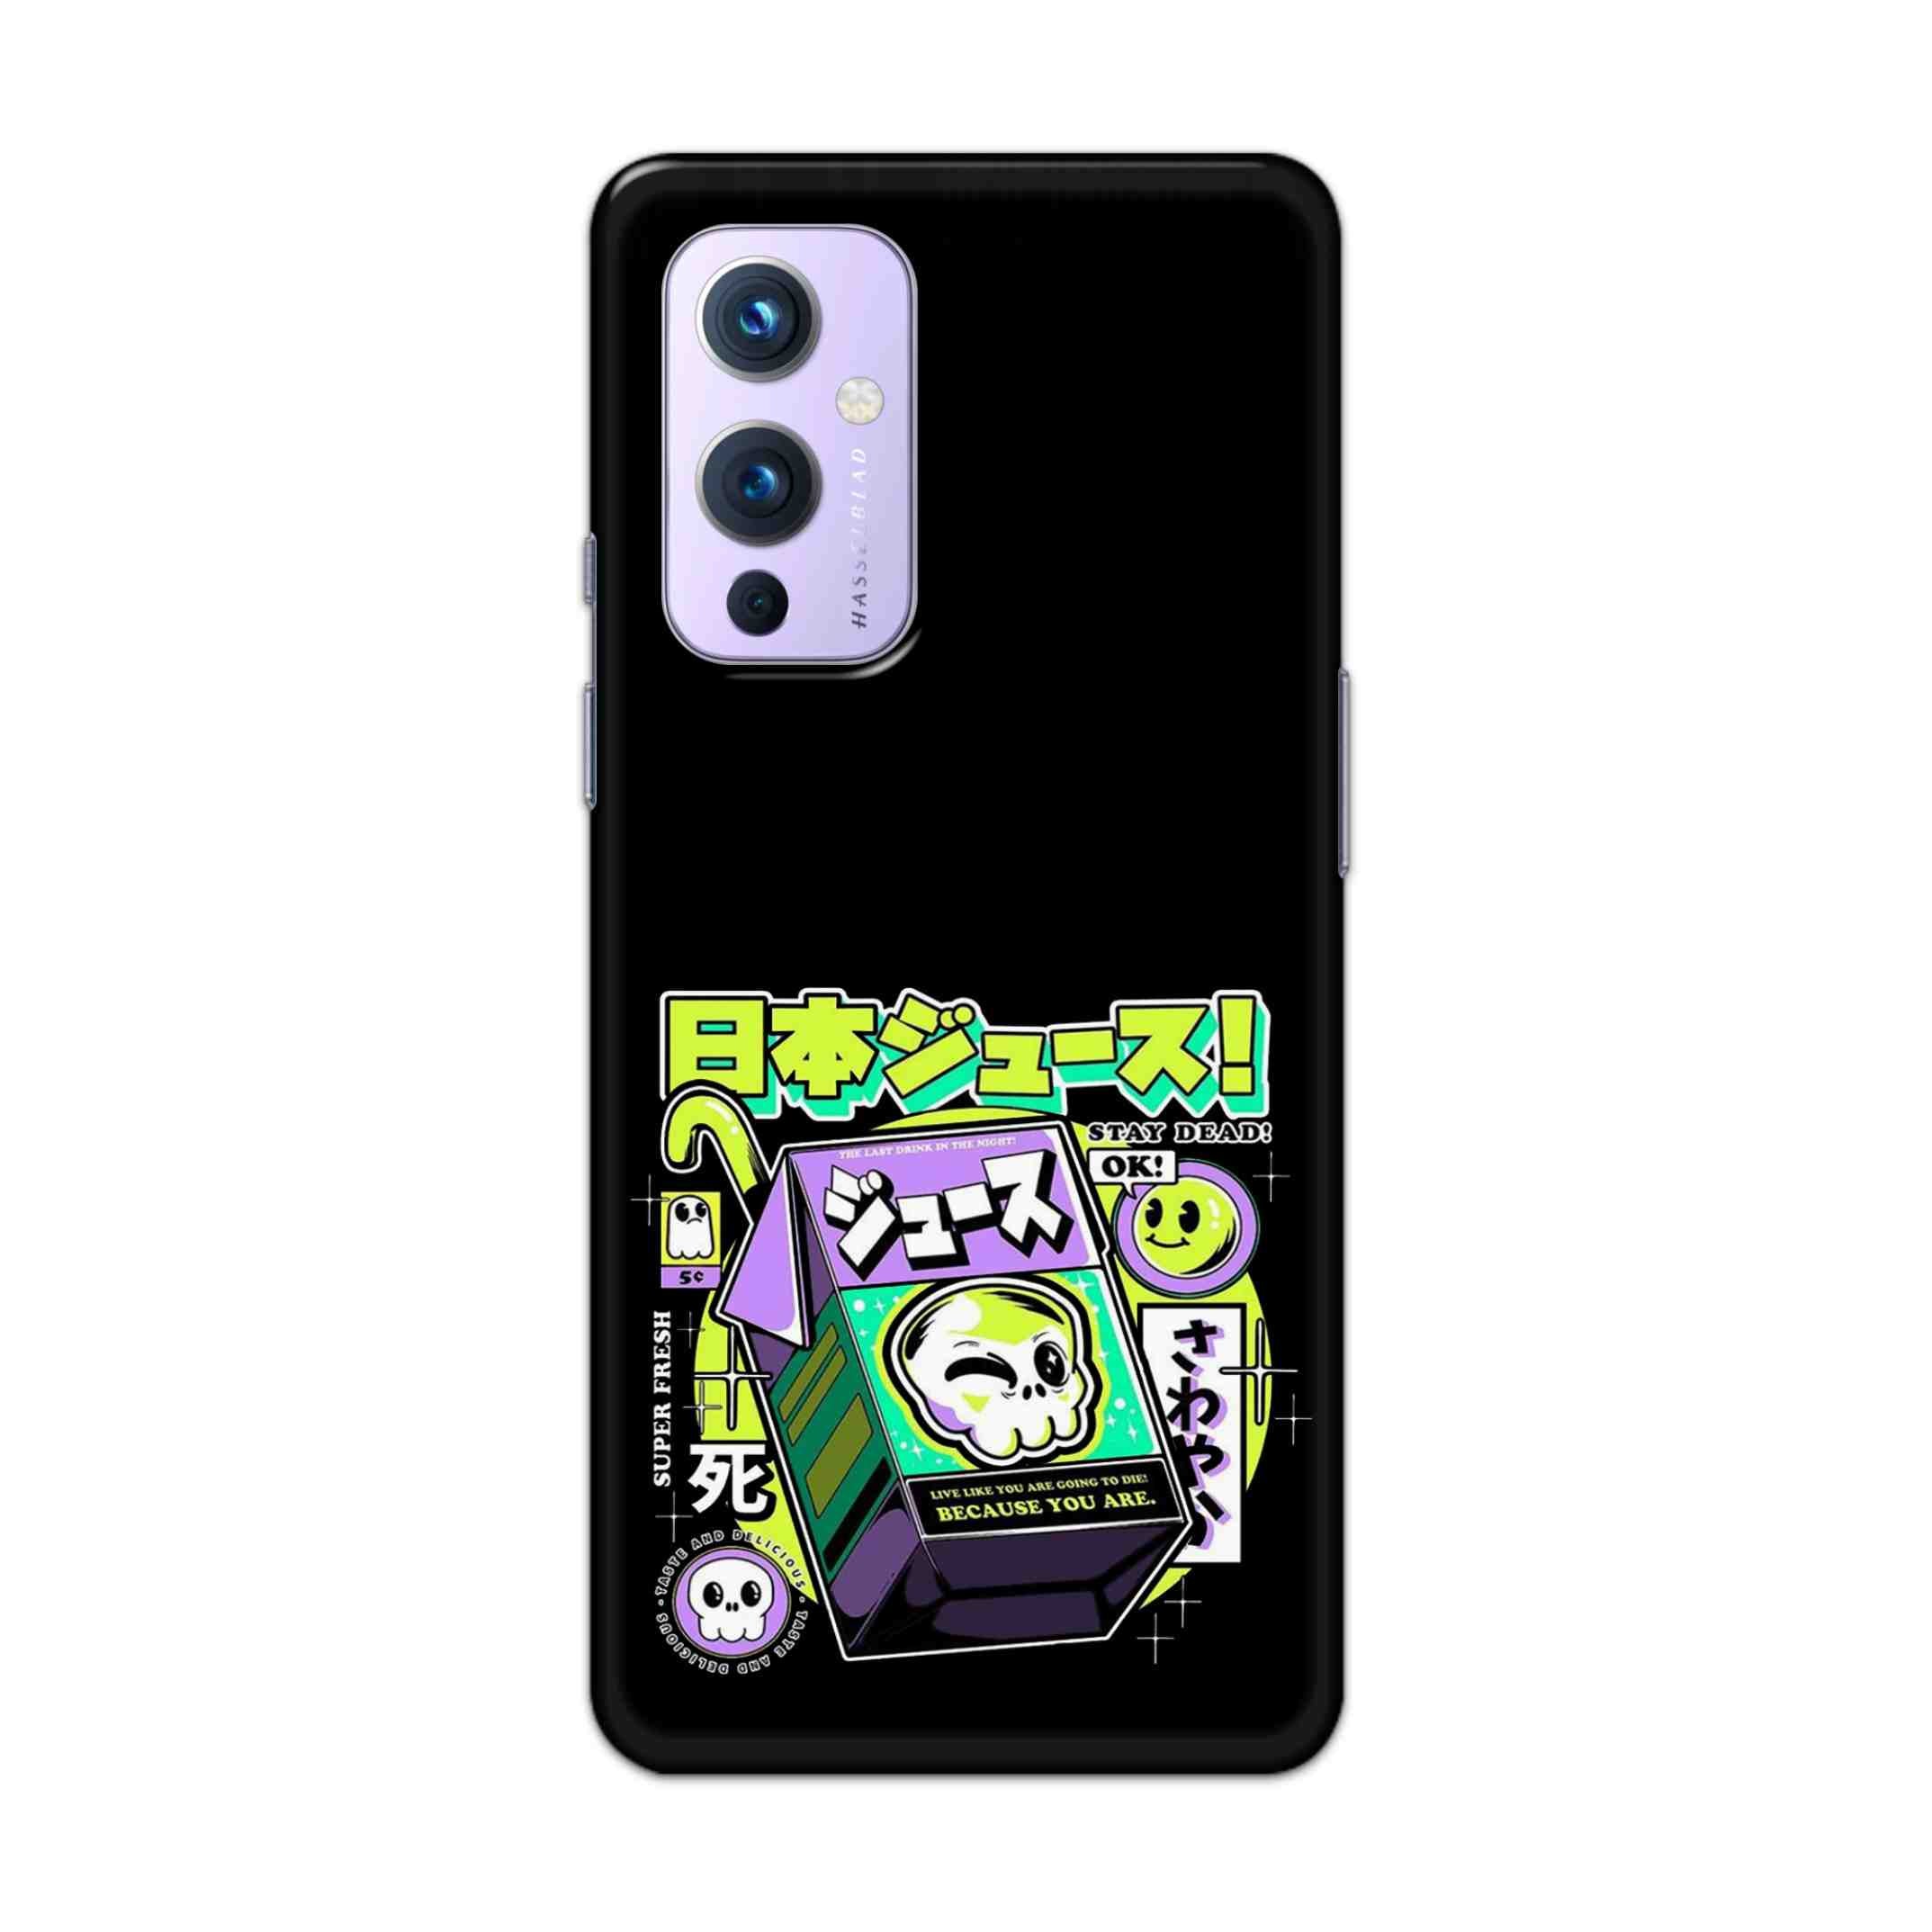 Buy Because You Are Hard Back Mobile Phone Case Cover For OnePlus 9 Online